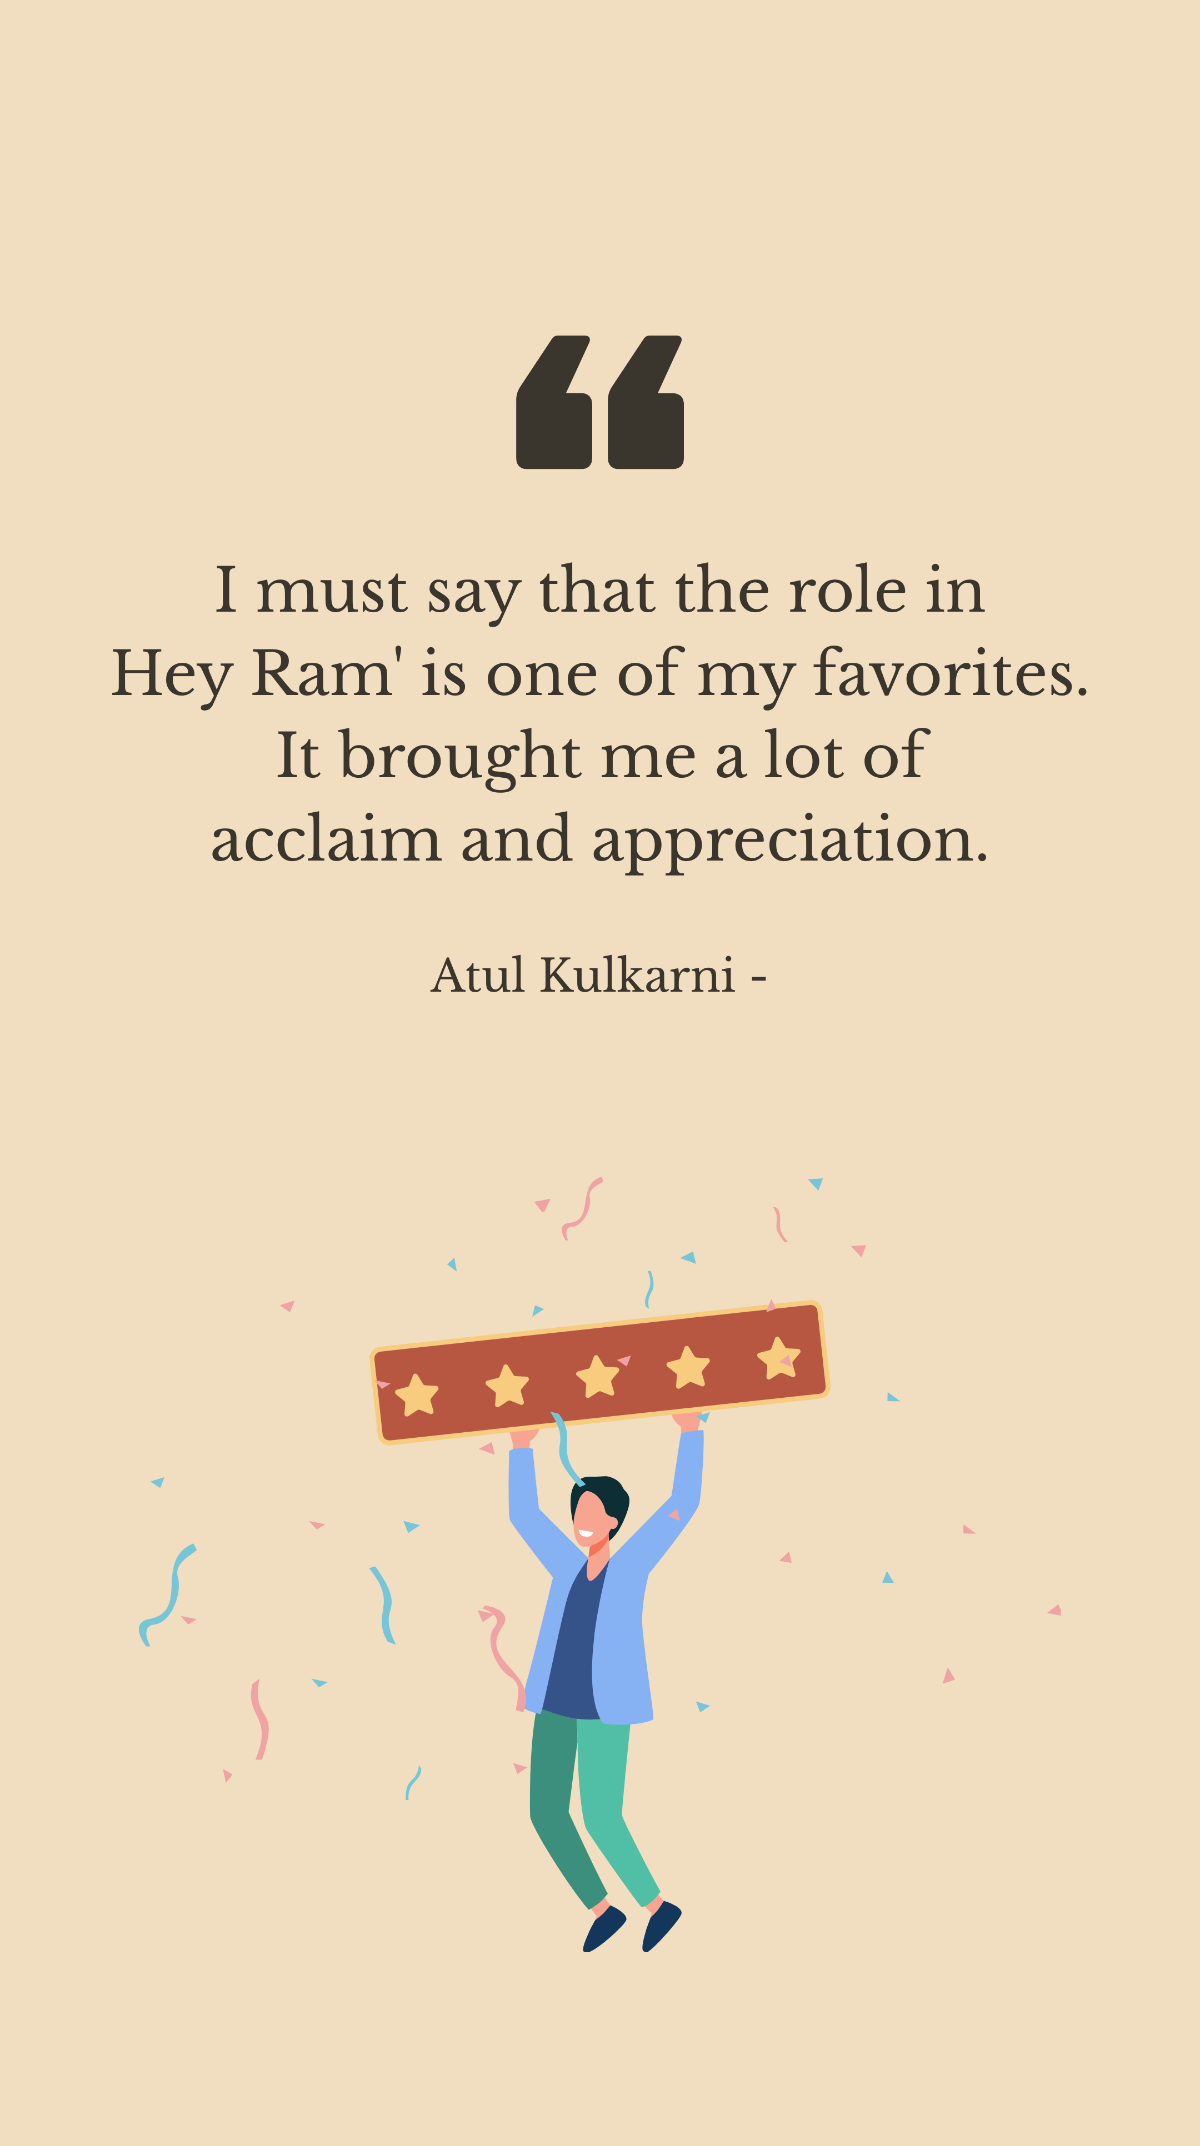 Atul Kulkarni - I must say that the role in Hey Ram' is one of my favorites. It brought me a lot of acclaim and appreciation. Template